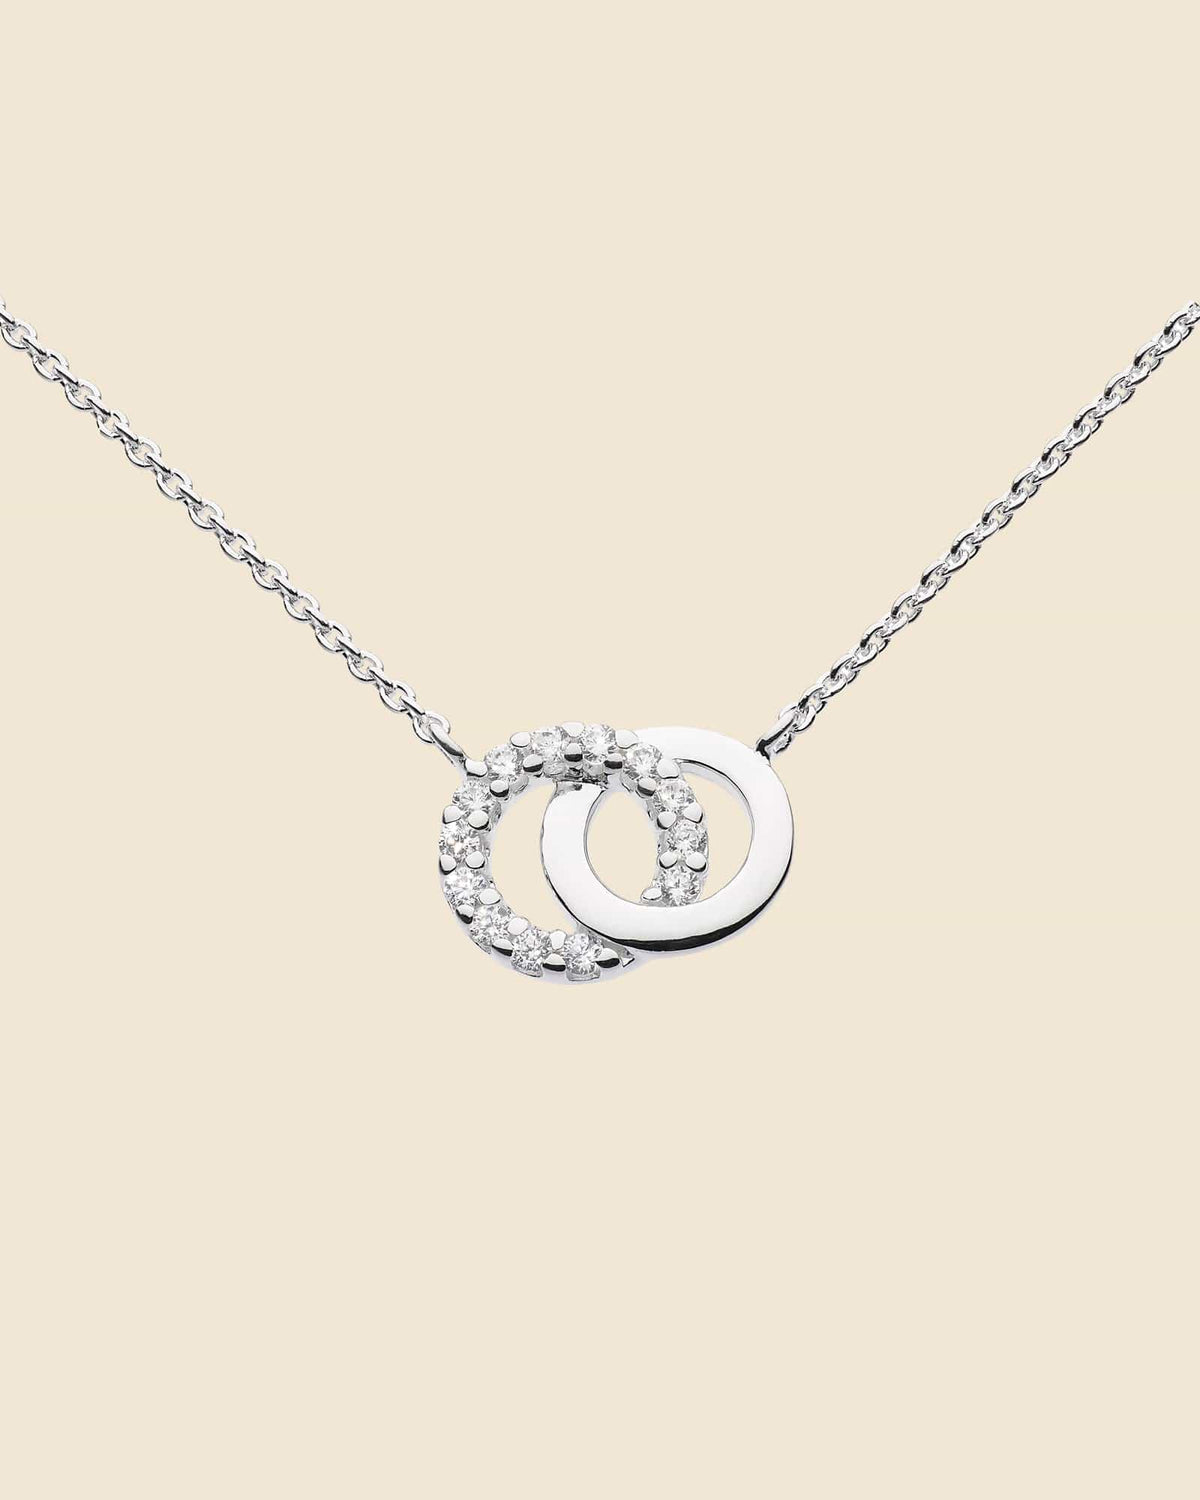 Sterling Silver and Cubic Zirconia Linked Circle Necklace (18")